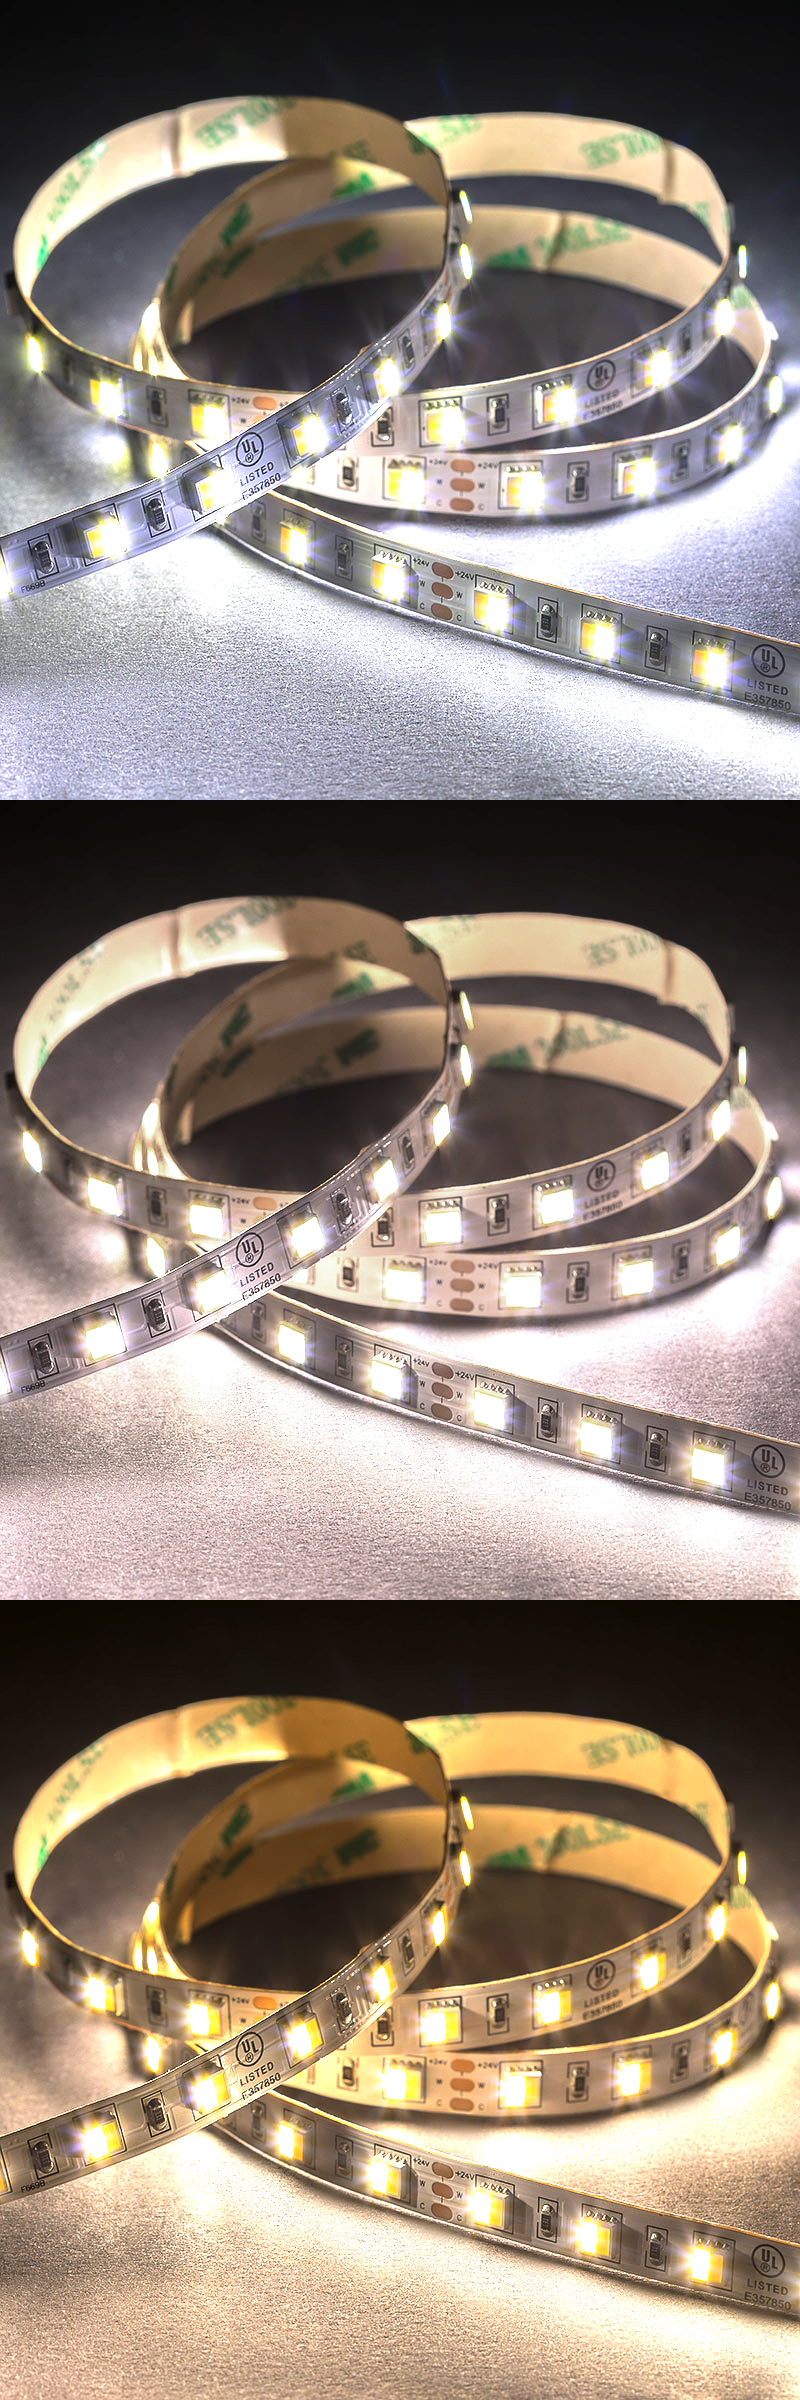 5m Tunable White LED Strip Light - 2-in-1 Color-Changing LED Tape Light - 24V - IP20 - Tunable White - 196.9in (16.40ft) - Click Image to Close